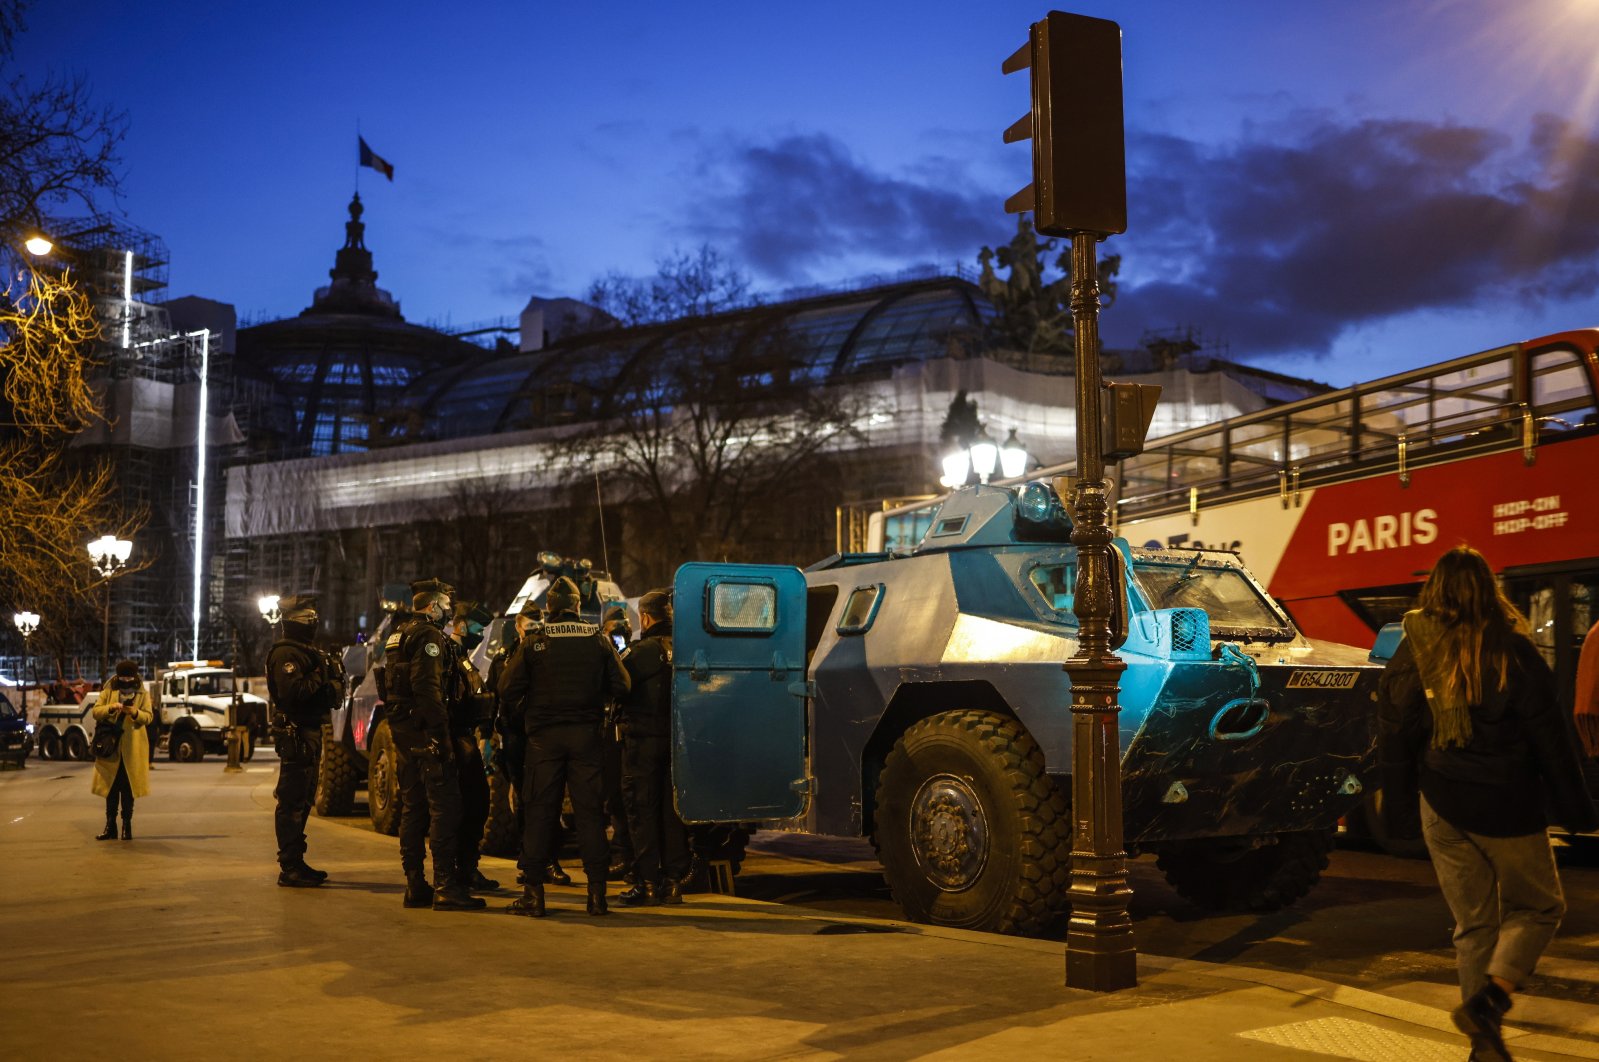 Armored vehicles are parked by the Grand Palais, near the Champs Elysee, as French police expect people to gather for the &quot;Freedom Convoy&quot; in Paris, France, Feb. 11, 2022. (EPA Photo)